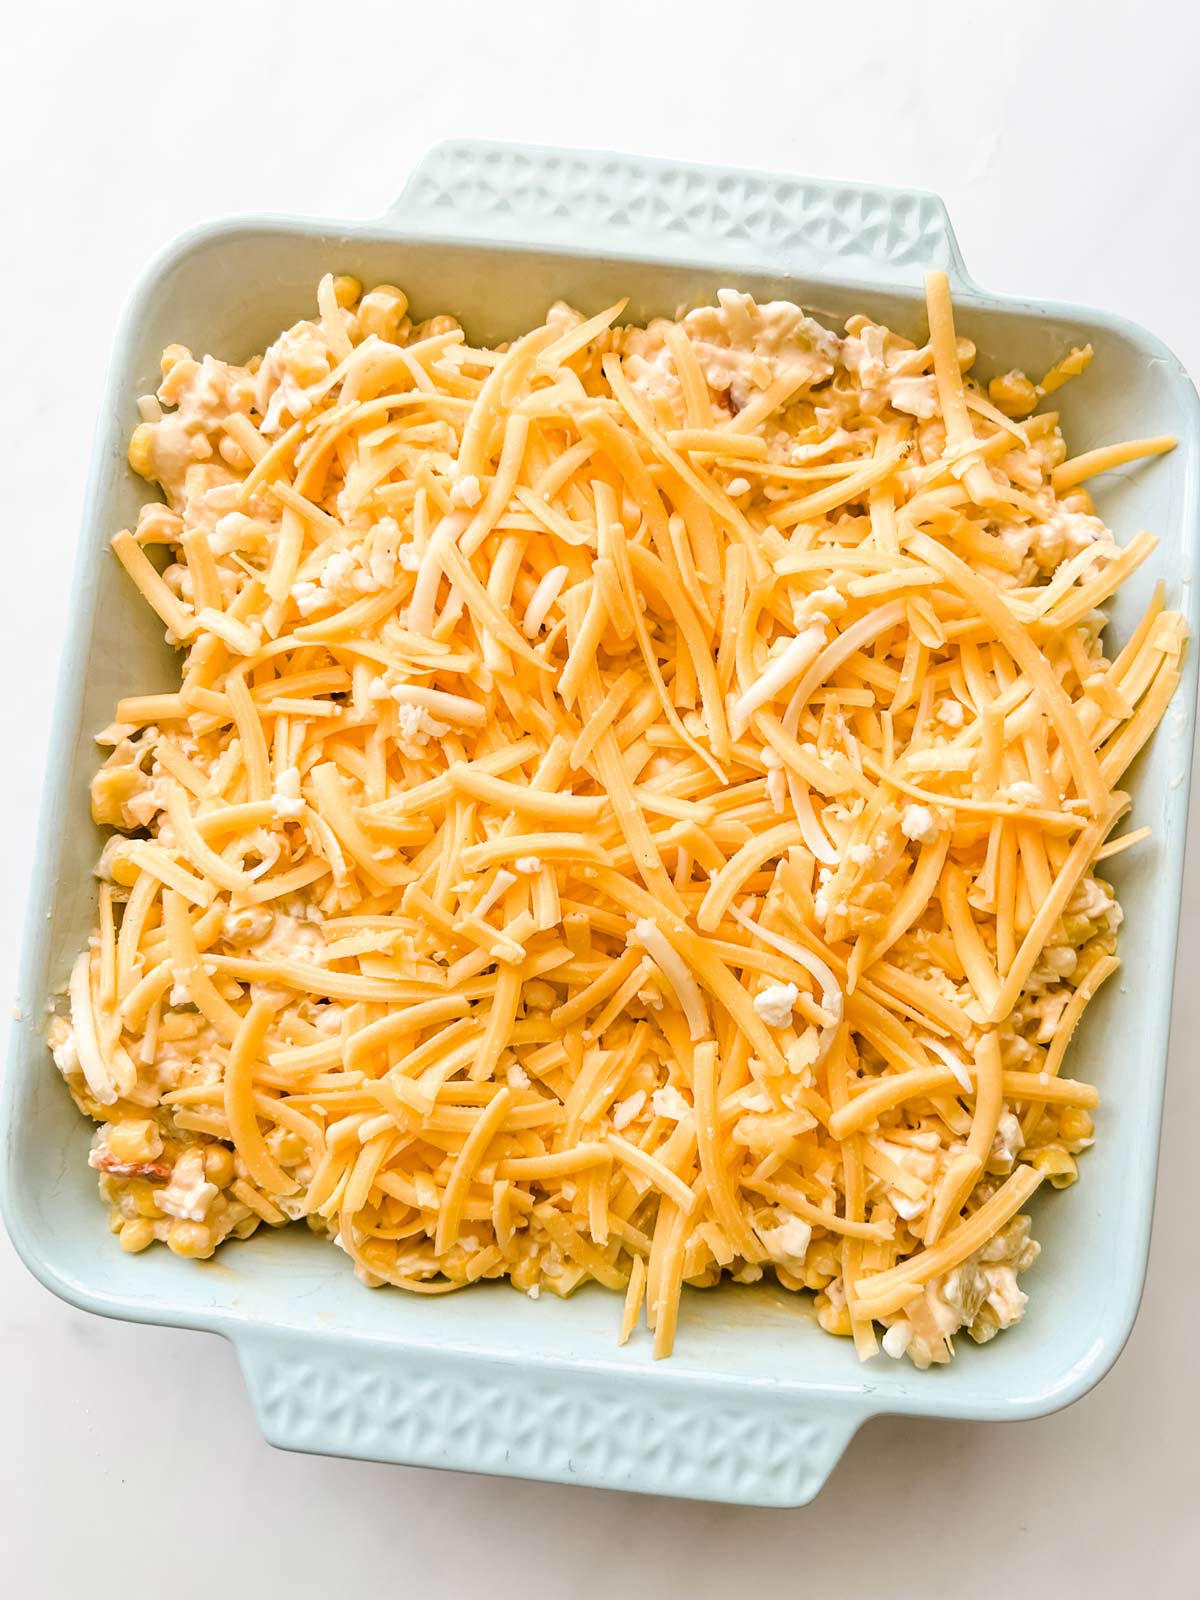 Shredded cheddar cheese on top of corn dip in a casserole dish.